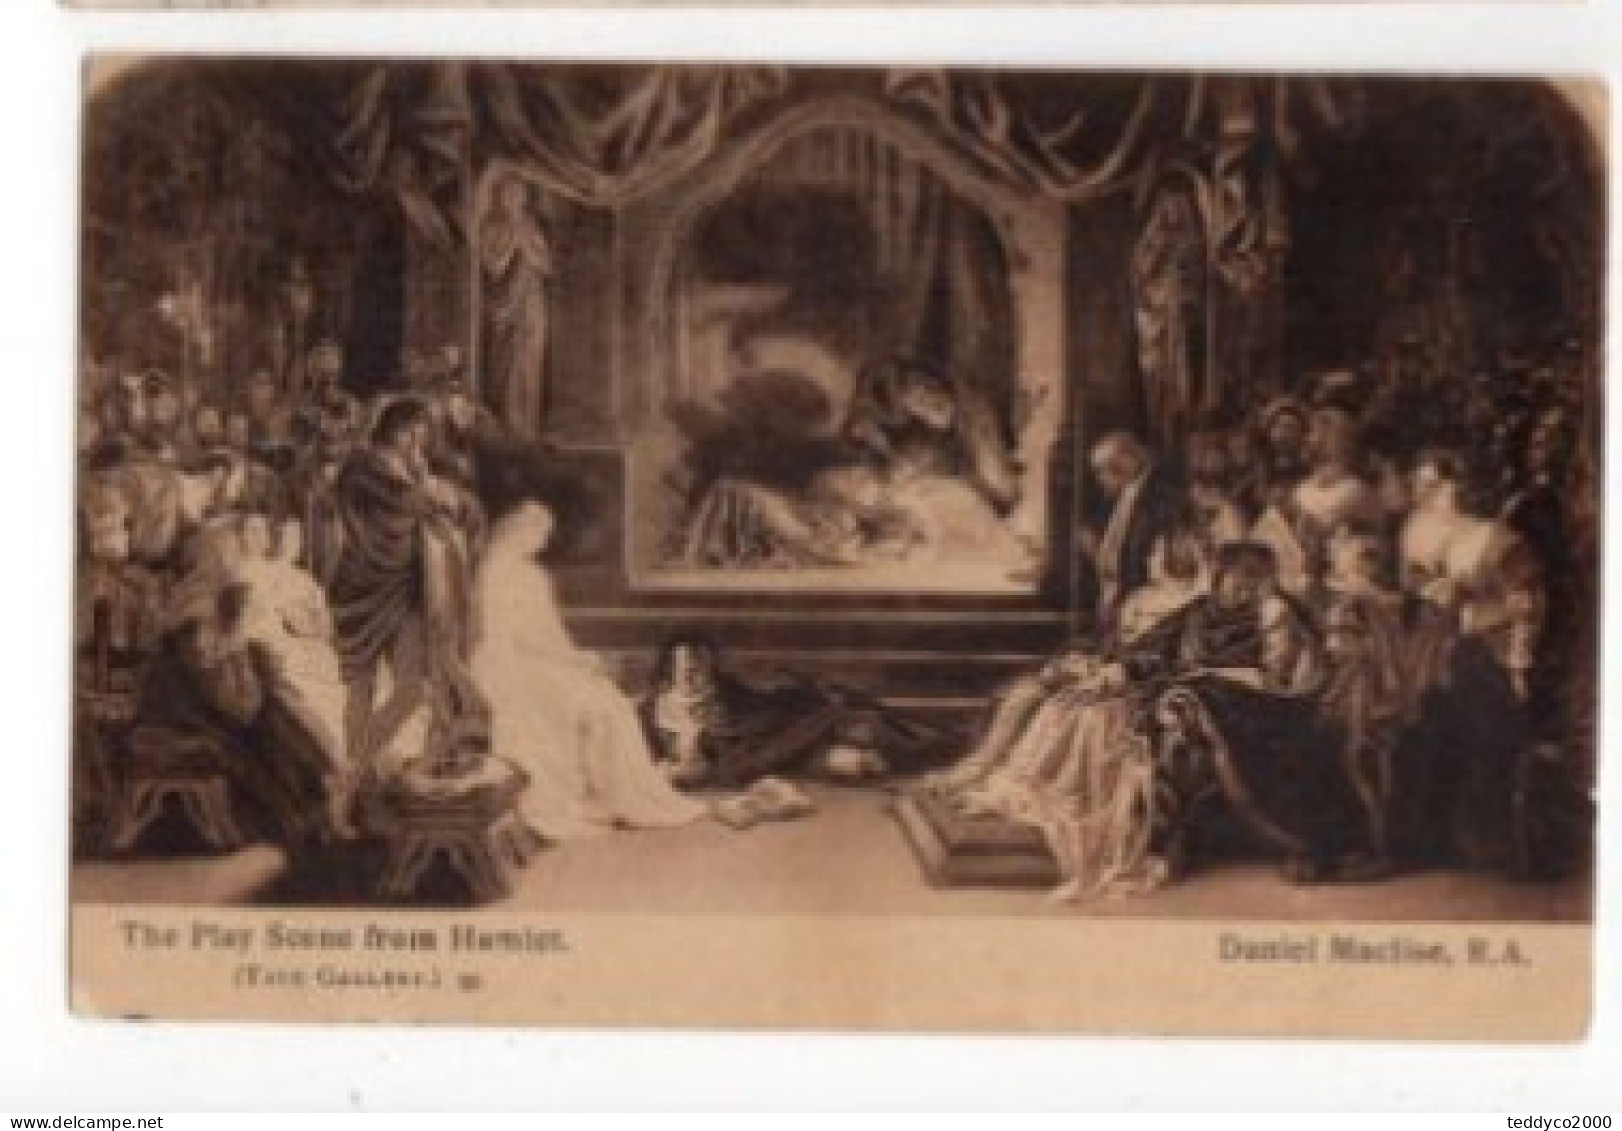 TATE GALLERY, Daniel Maclise The Play Scene From Hamlet 1911 - Musei